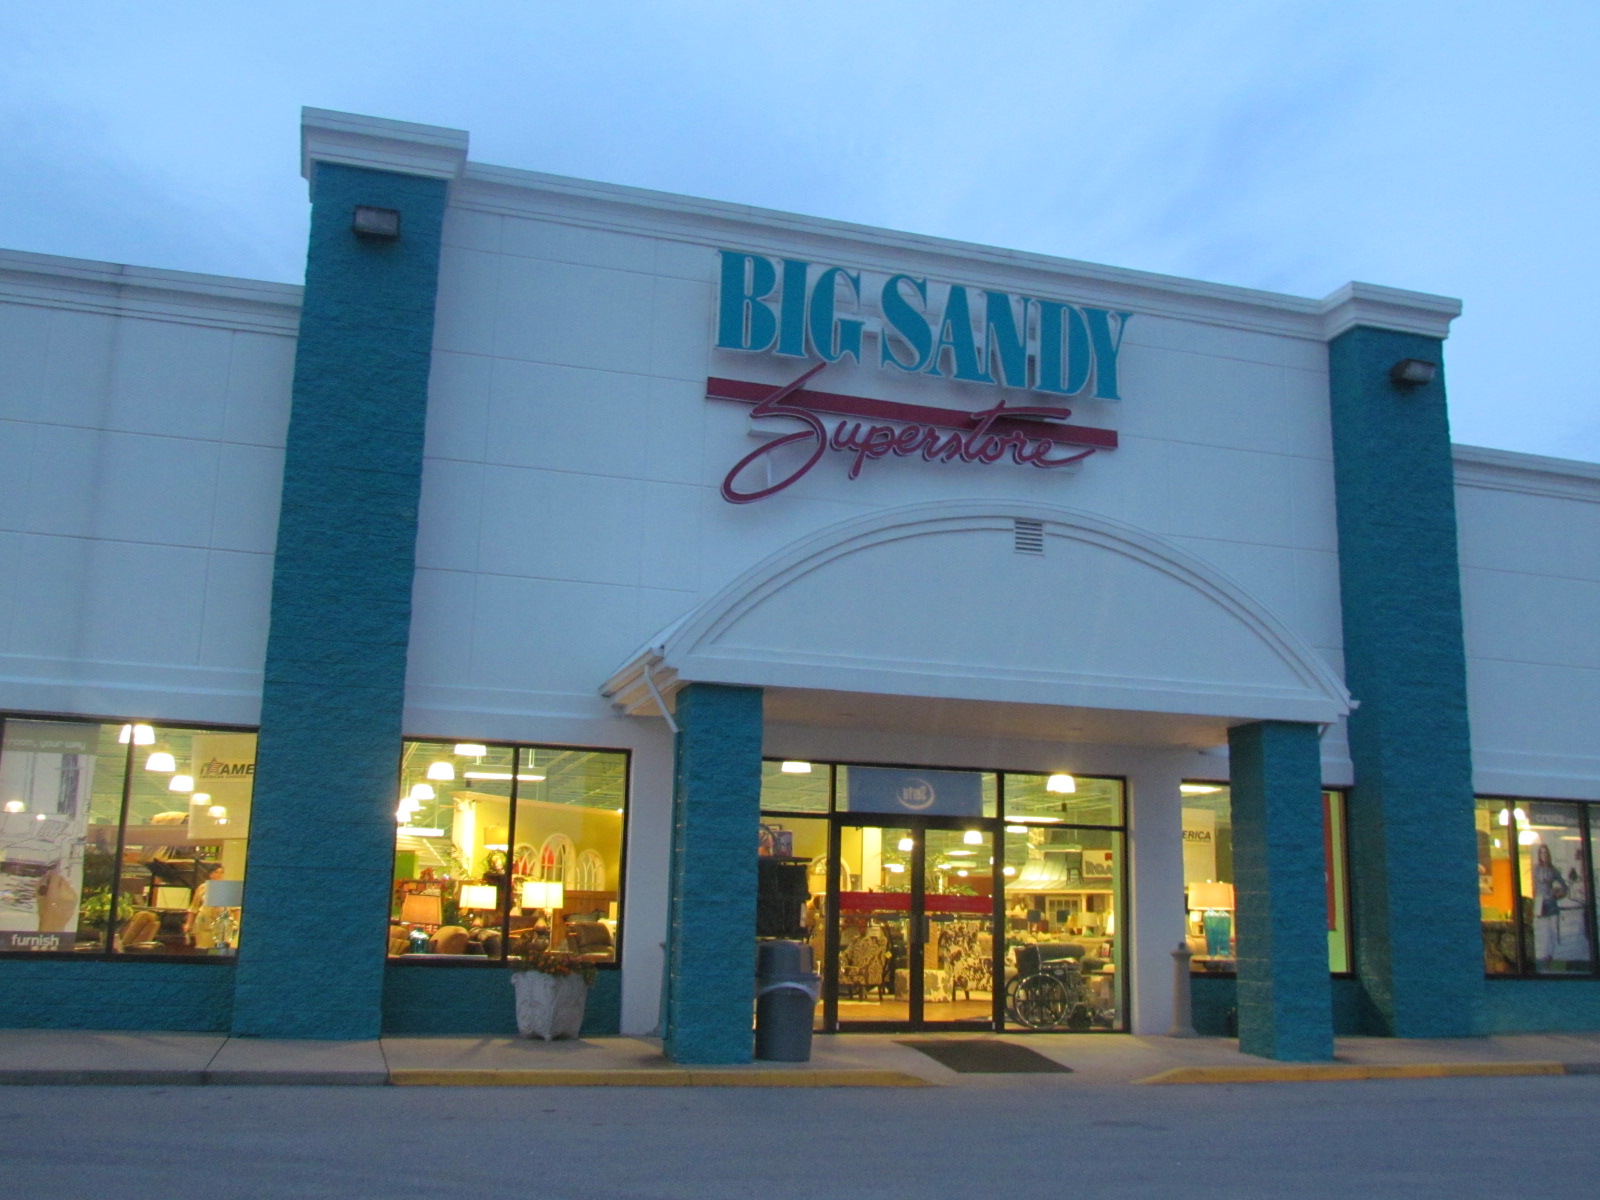 Furniture, Mattresses, Electronics and Appliances, Big Sandy Superstore